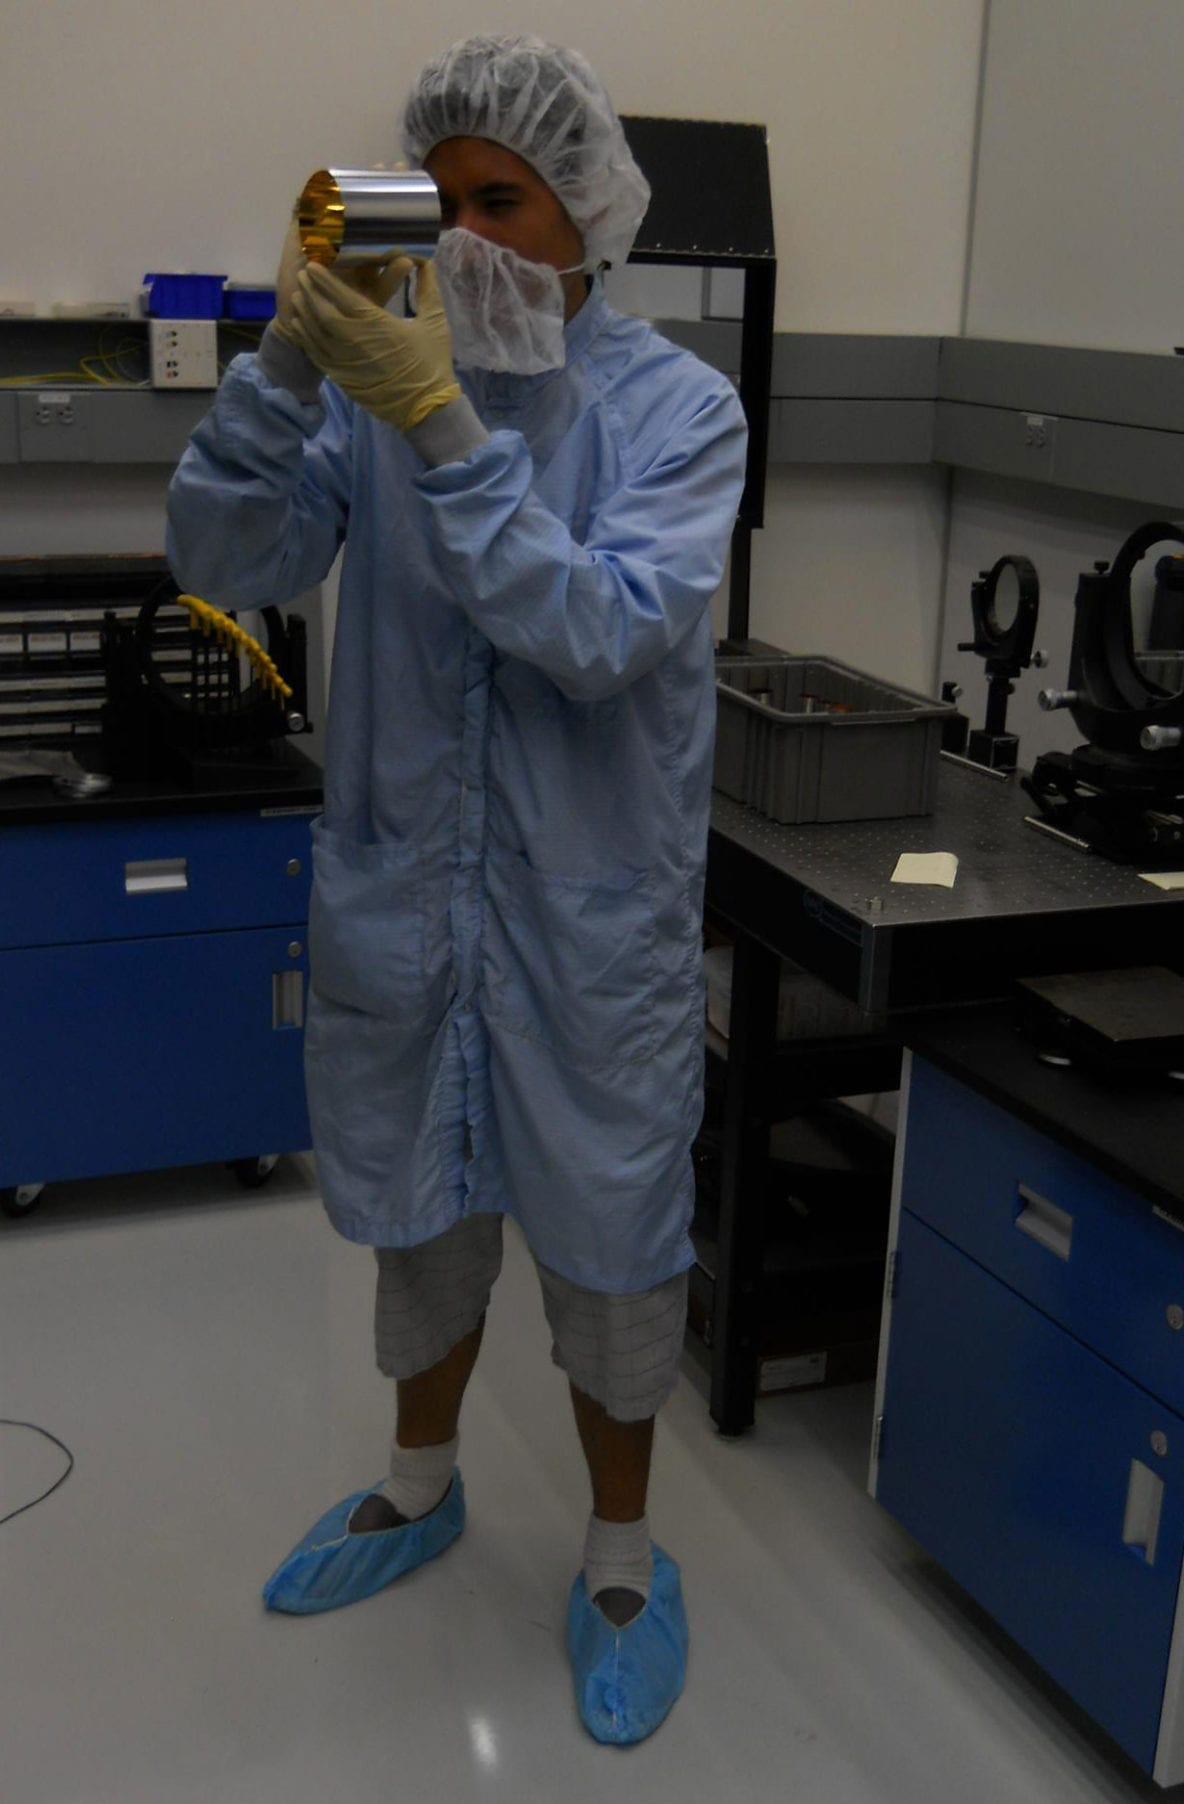 Goddard intern Billy Barrios performing an optical check on one of the NICER OpticÛªs mirrors. Image Credit: URC.